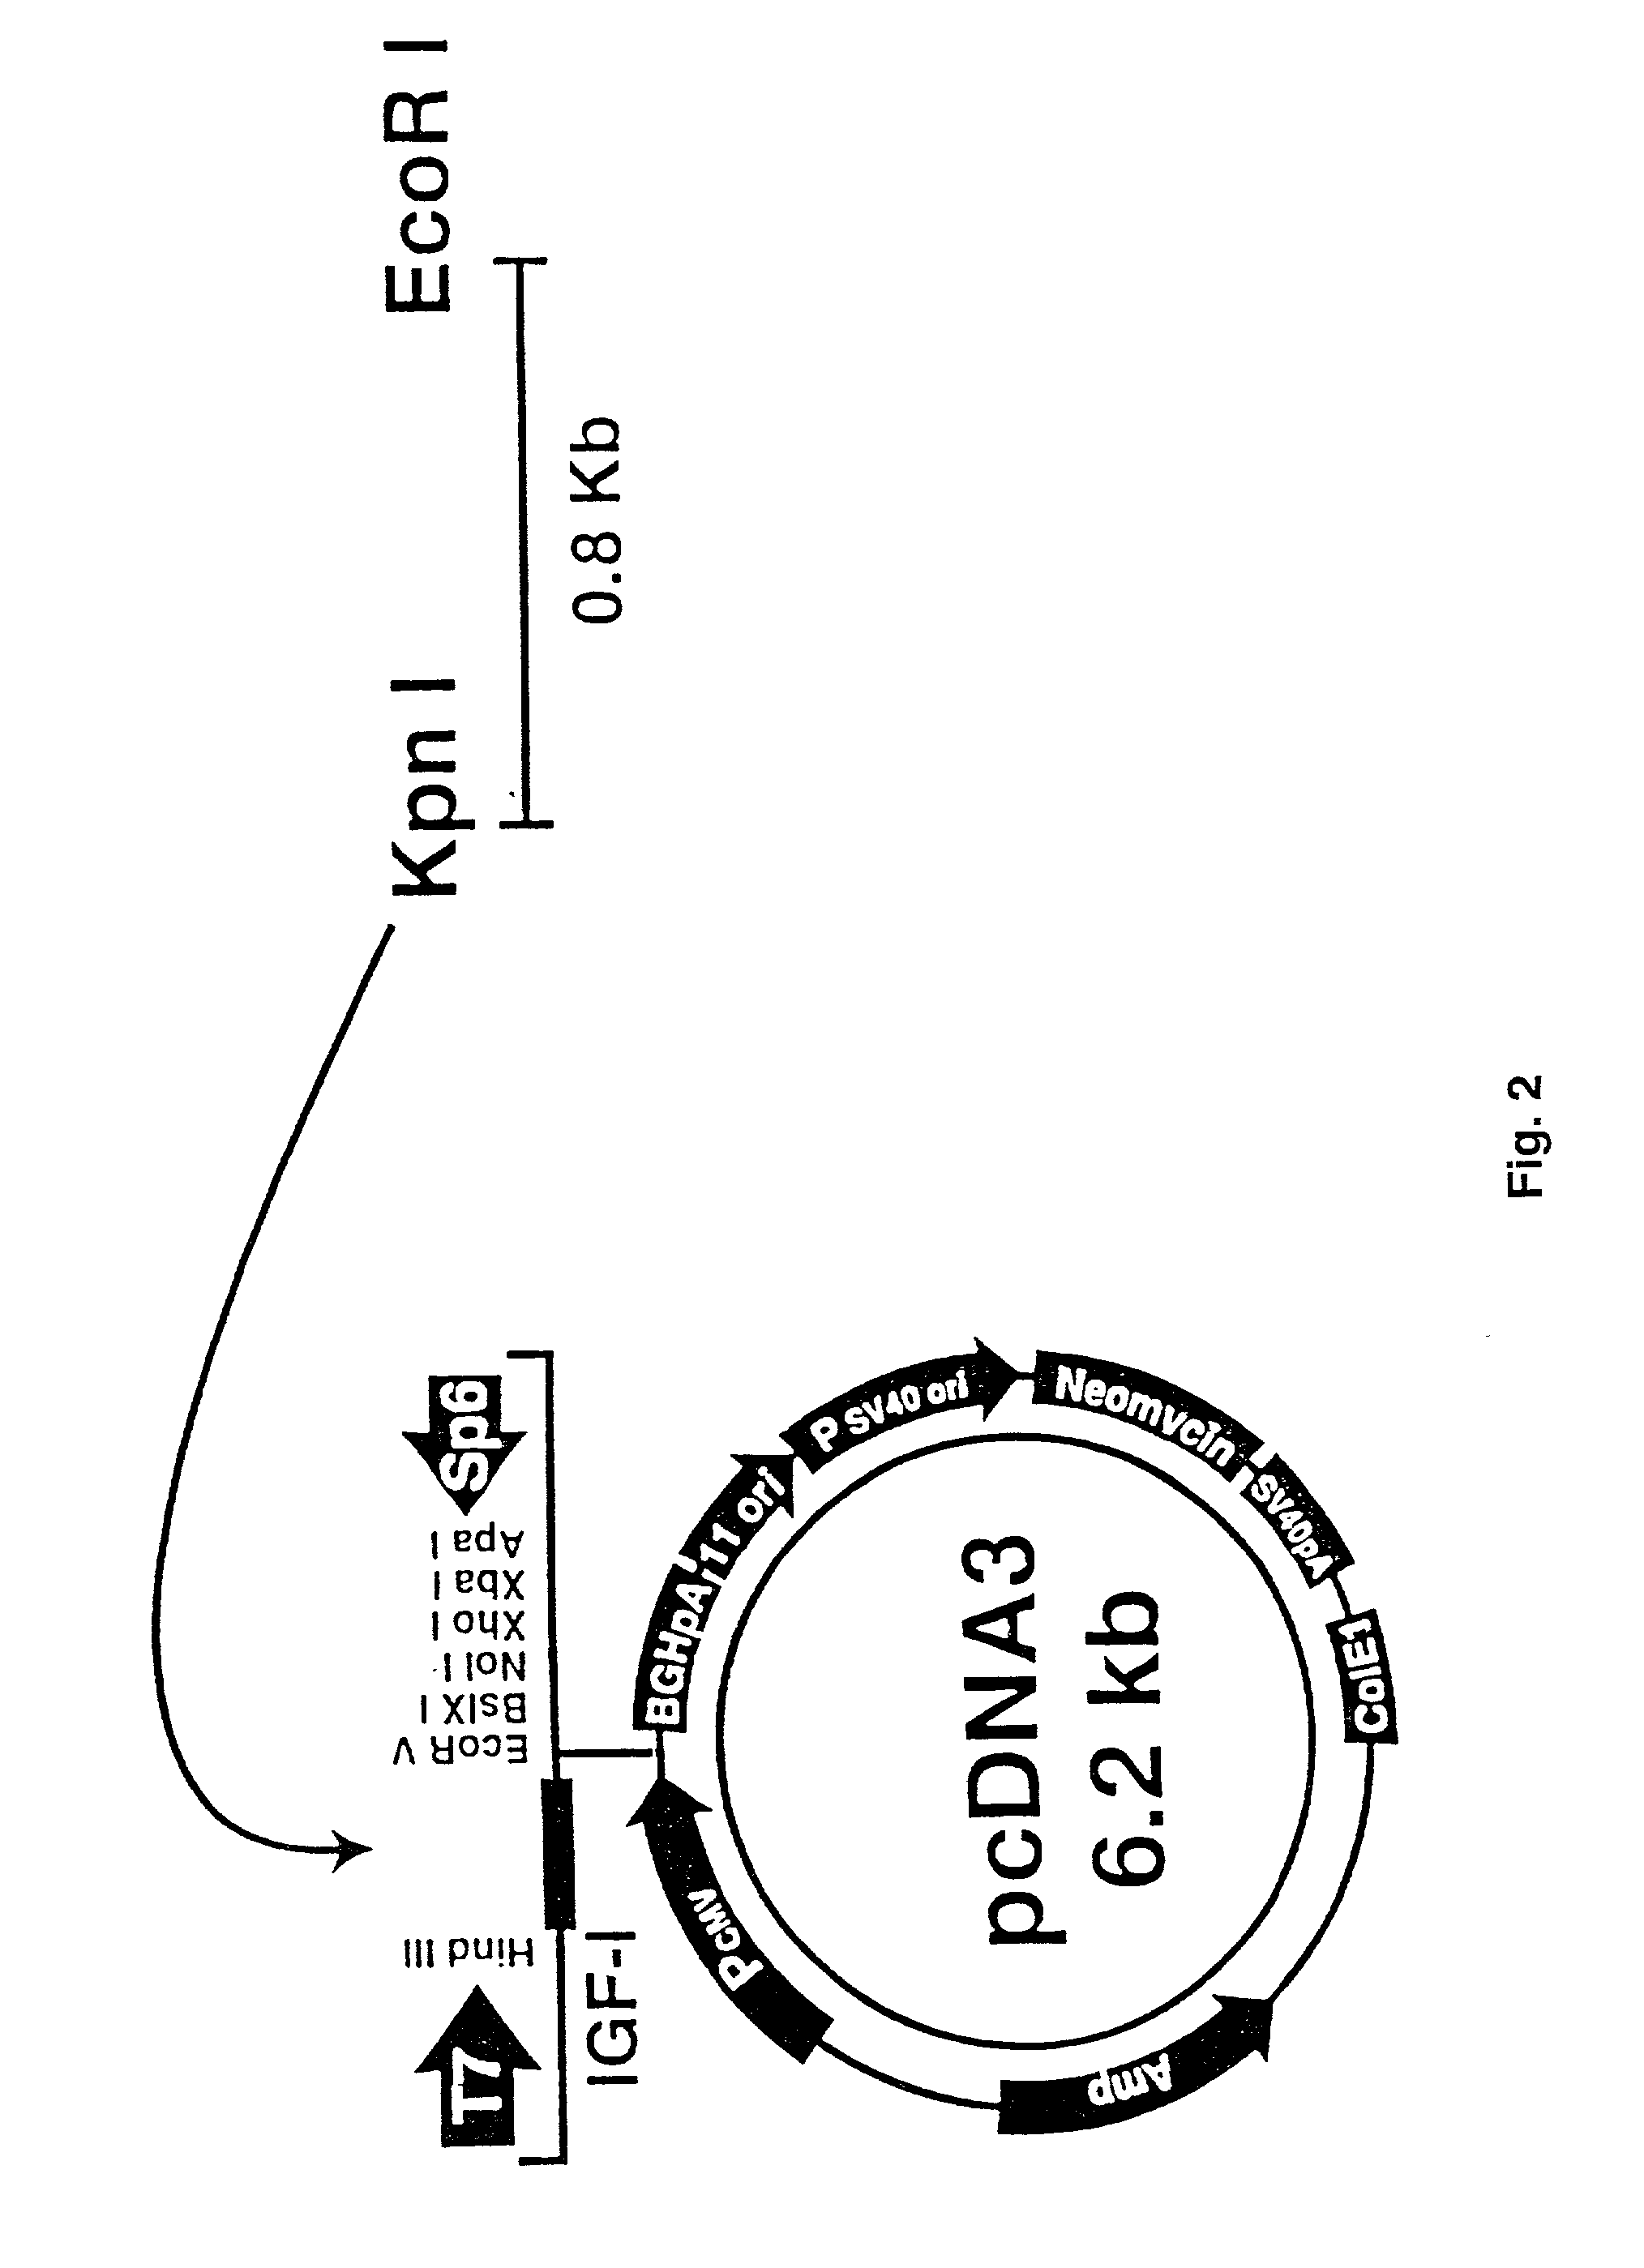 Methods to enhance wound healing and enhanced wound coverage material